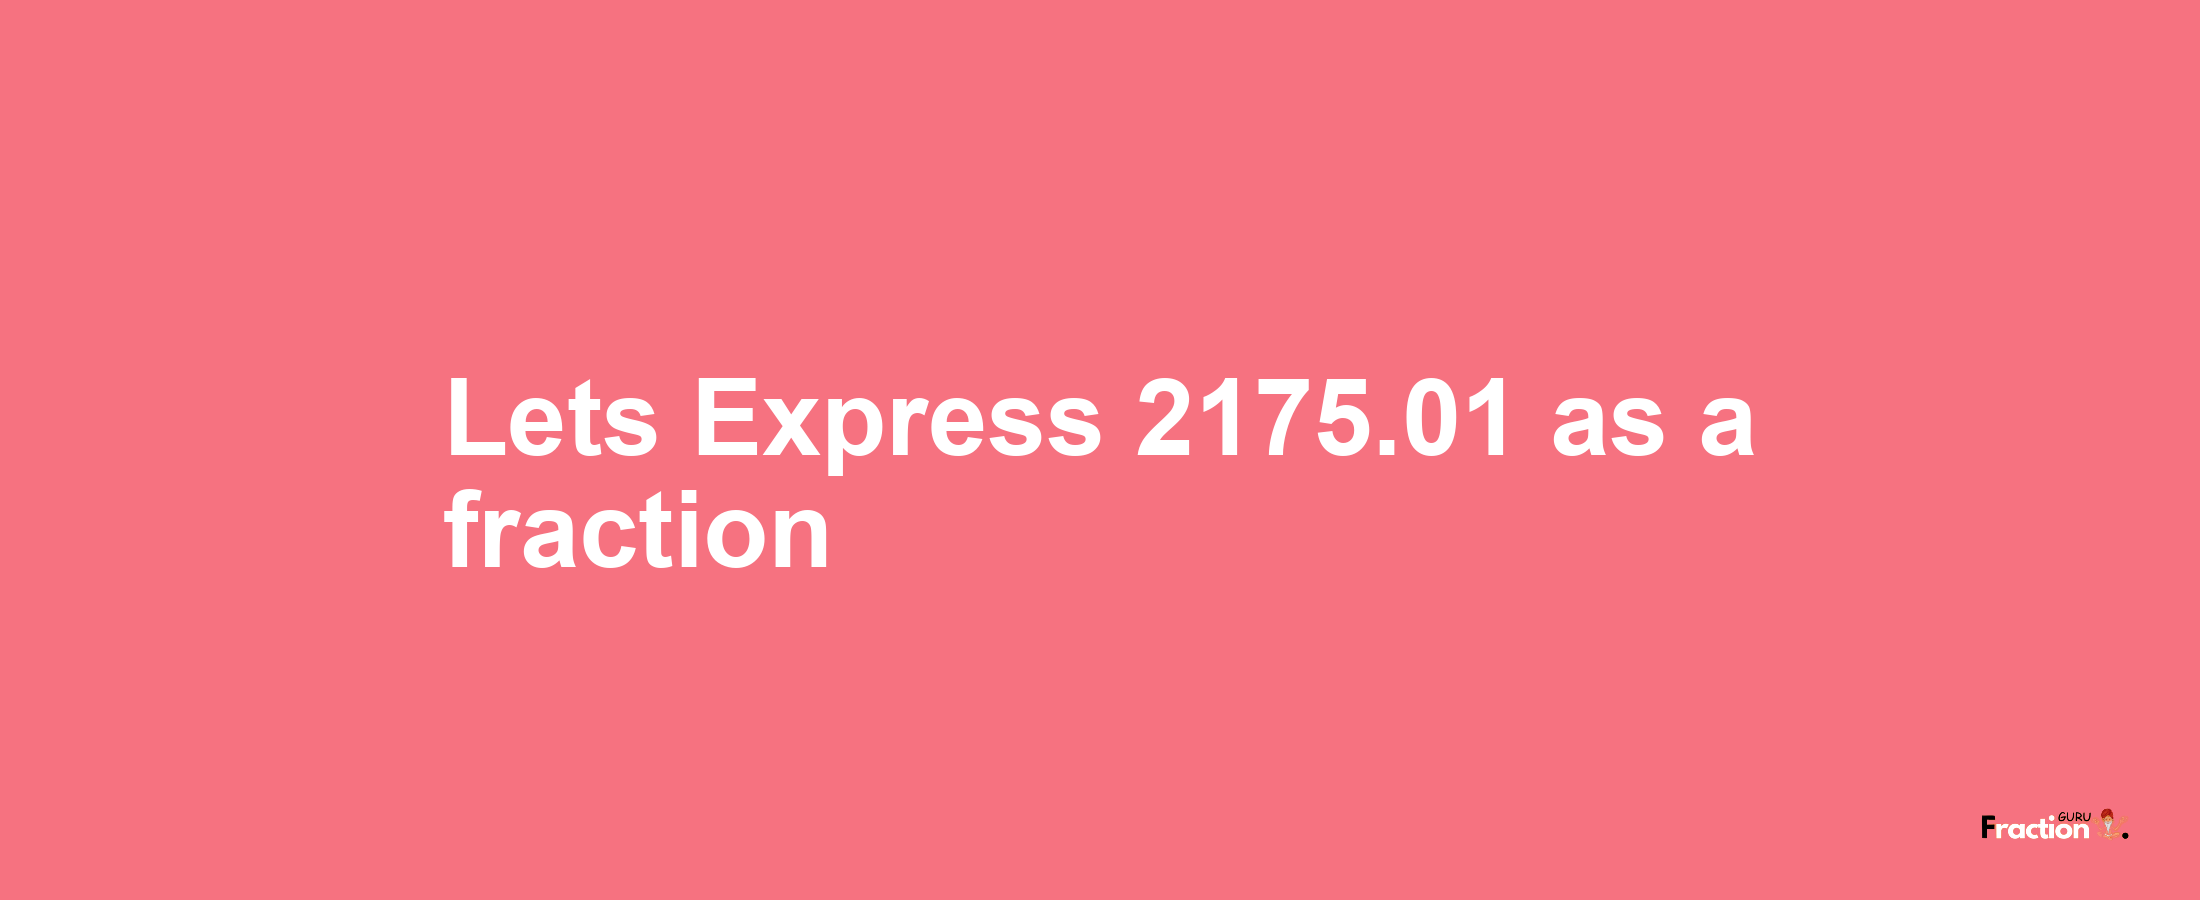 Lets Express 2175.01 as afraction